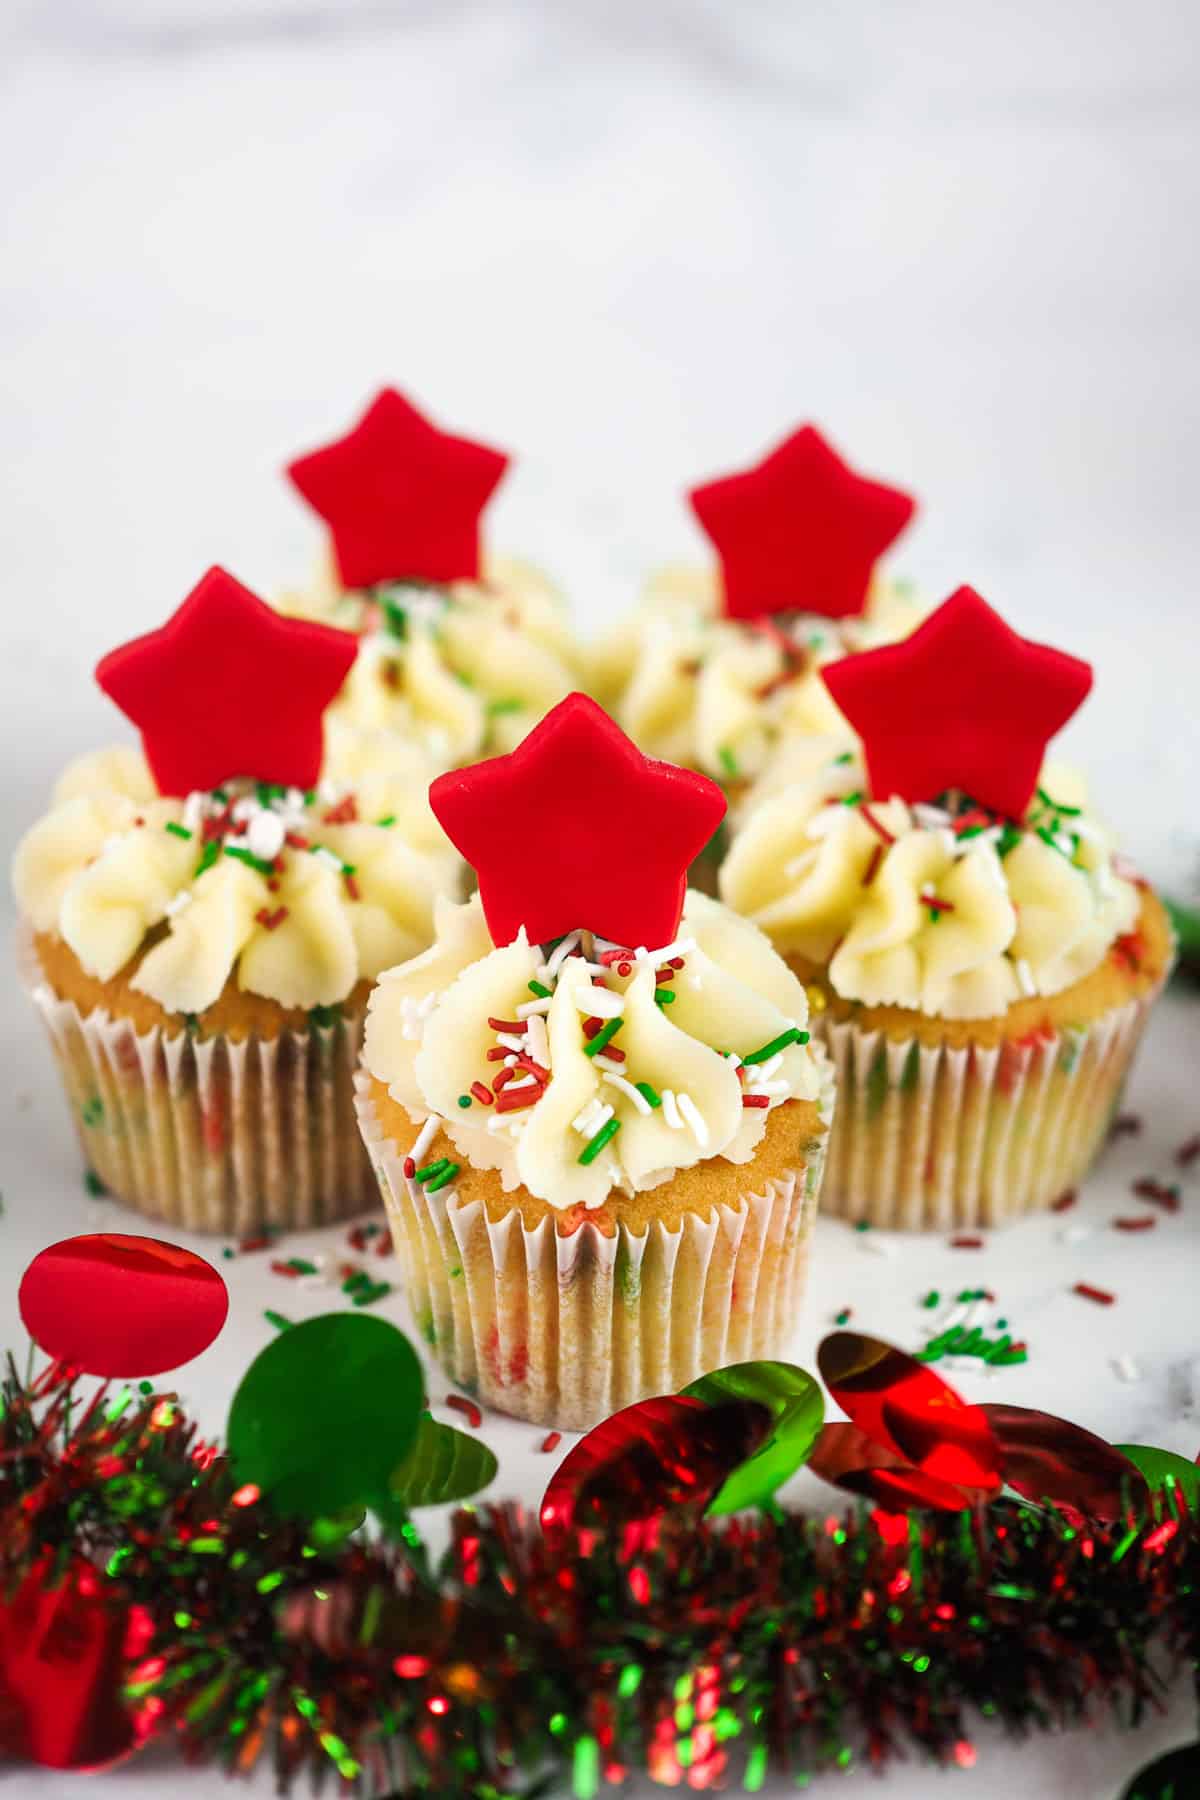 A batch of cupcakes decorated with red, white and green sprinkles and a large red fondant star.